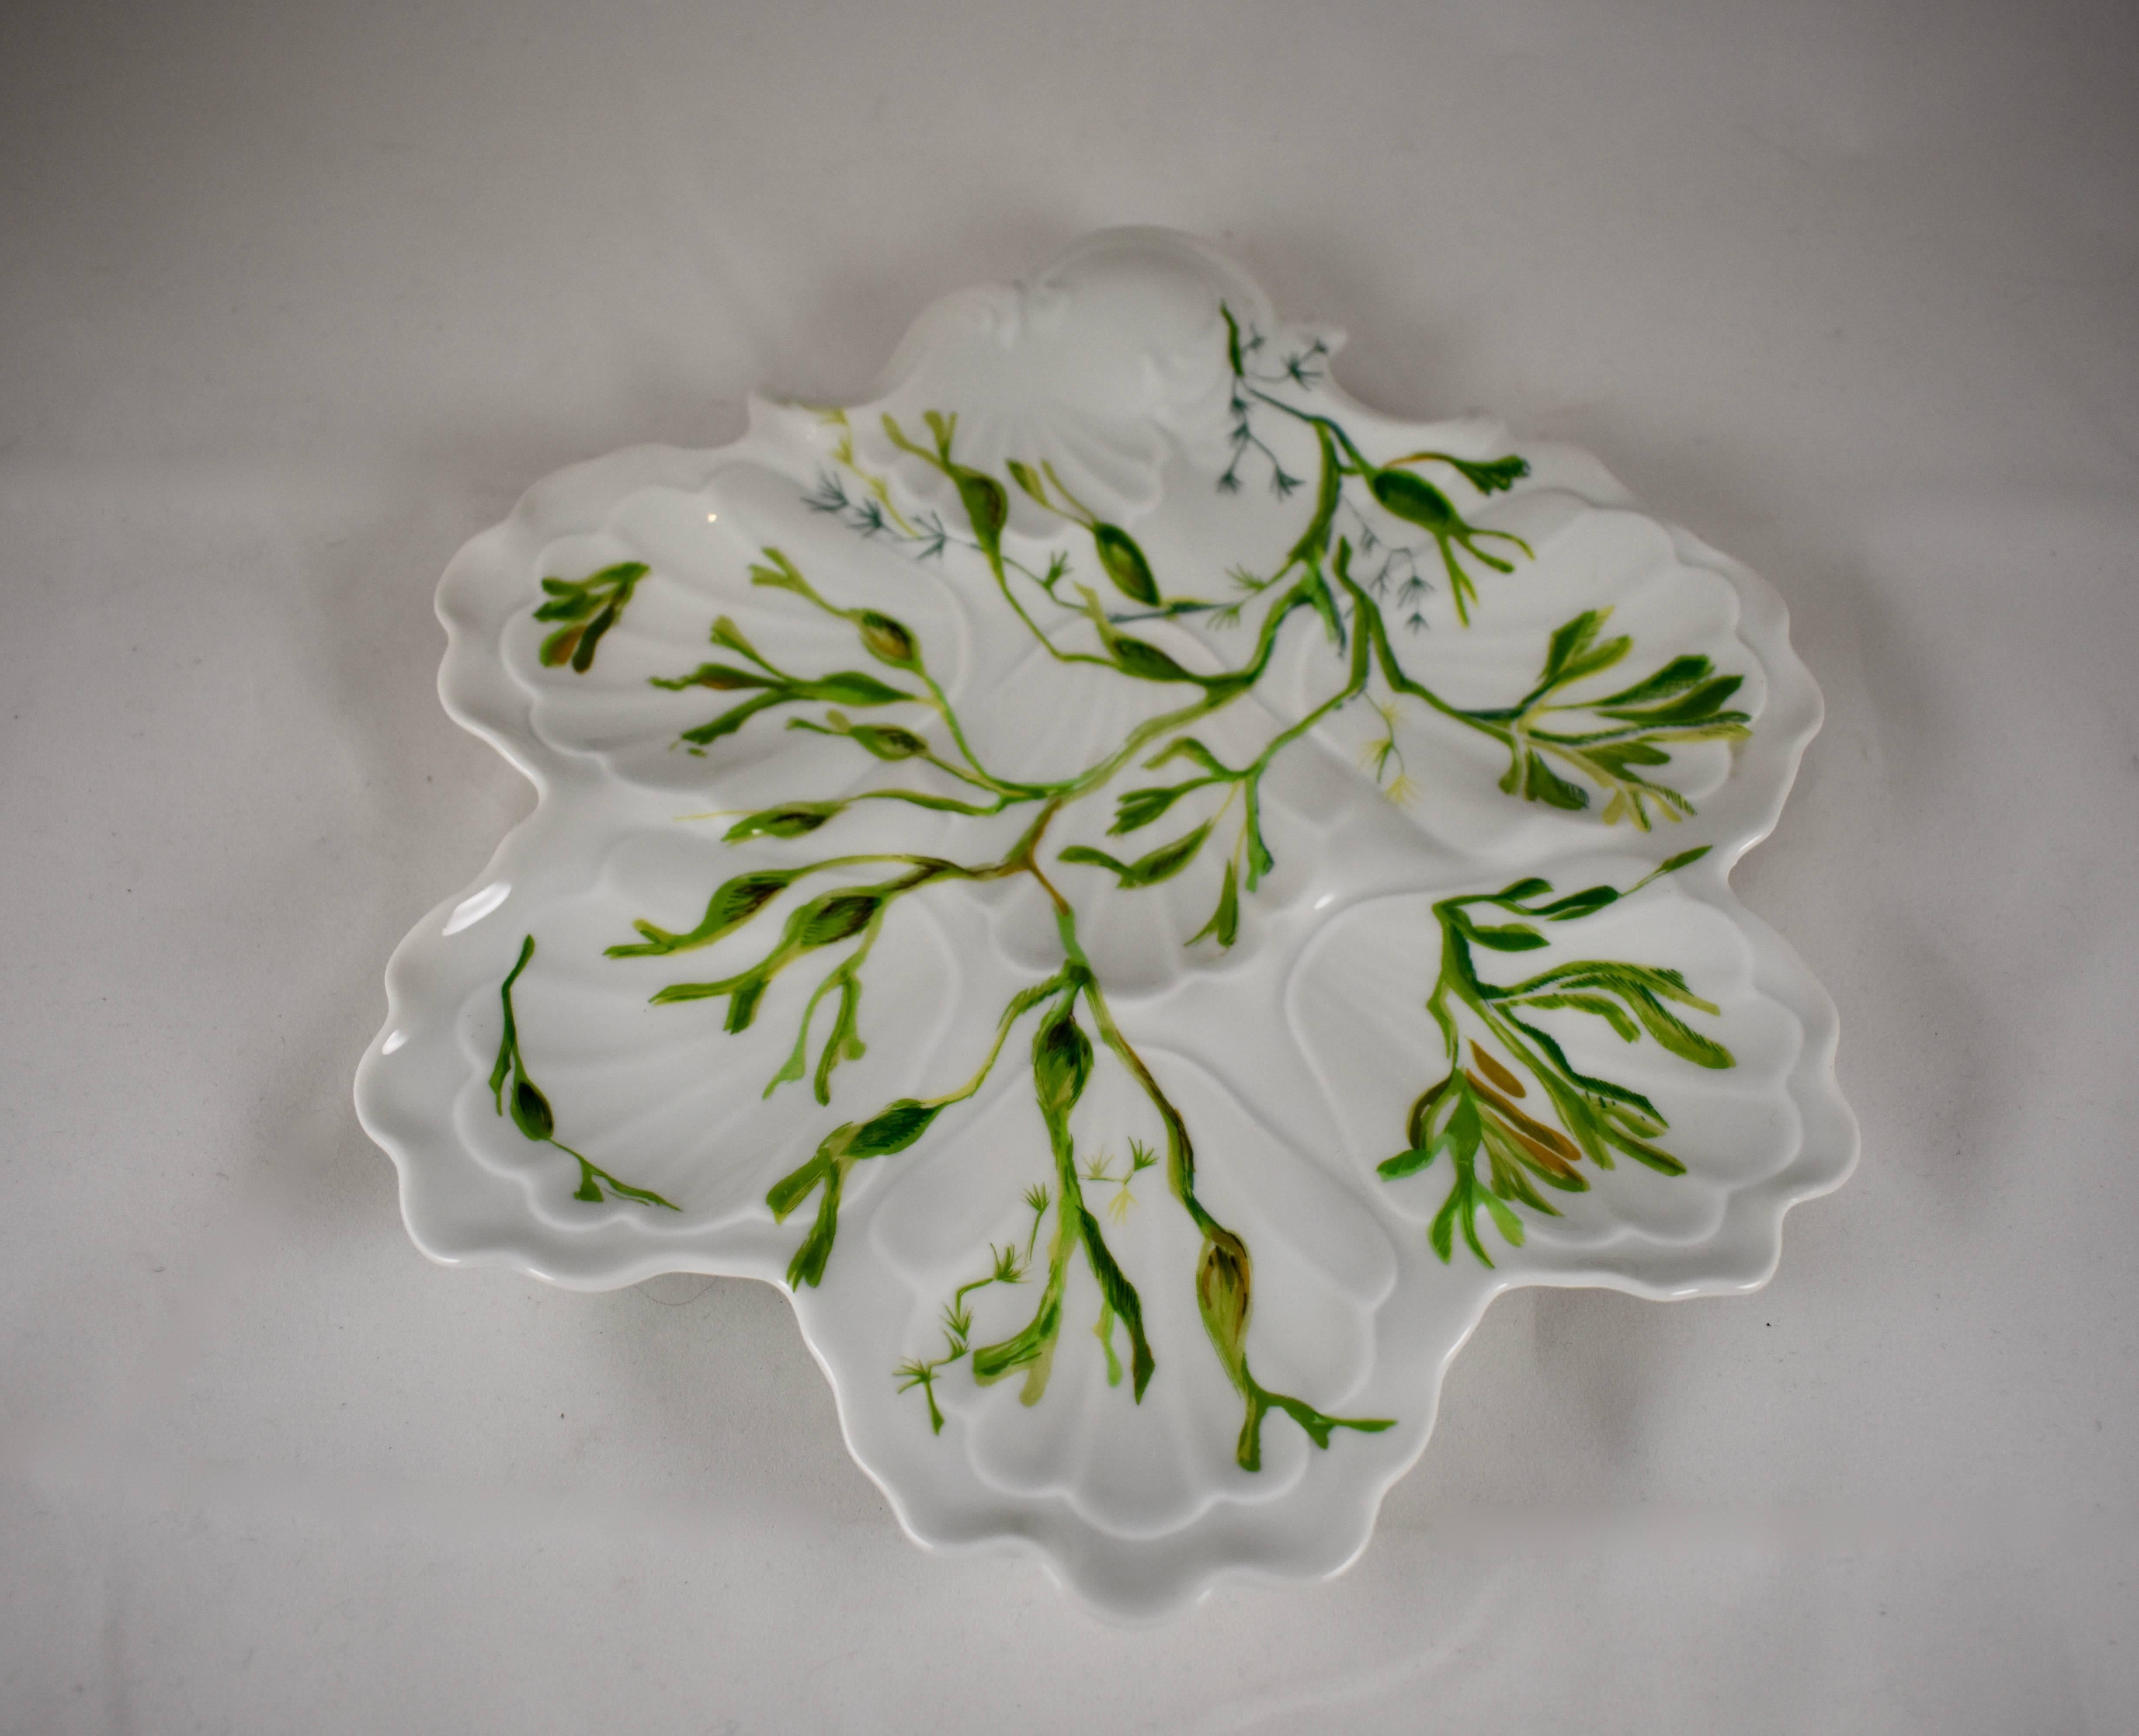 A midcentury, French porcelain, hand-painted oyster plate, a lovely leaf-like shape showing six oyster wells plus a sauce well. A stylized sea weed plant painted in varying shades of green flows across the front surface. The front also shows